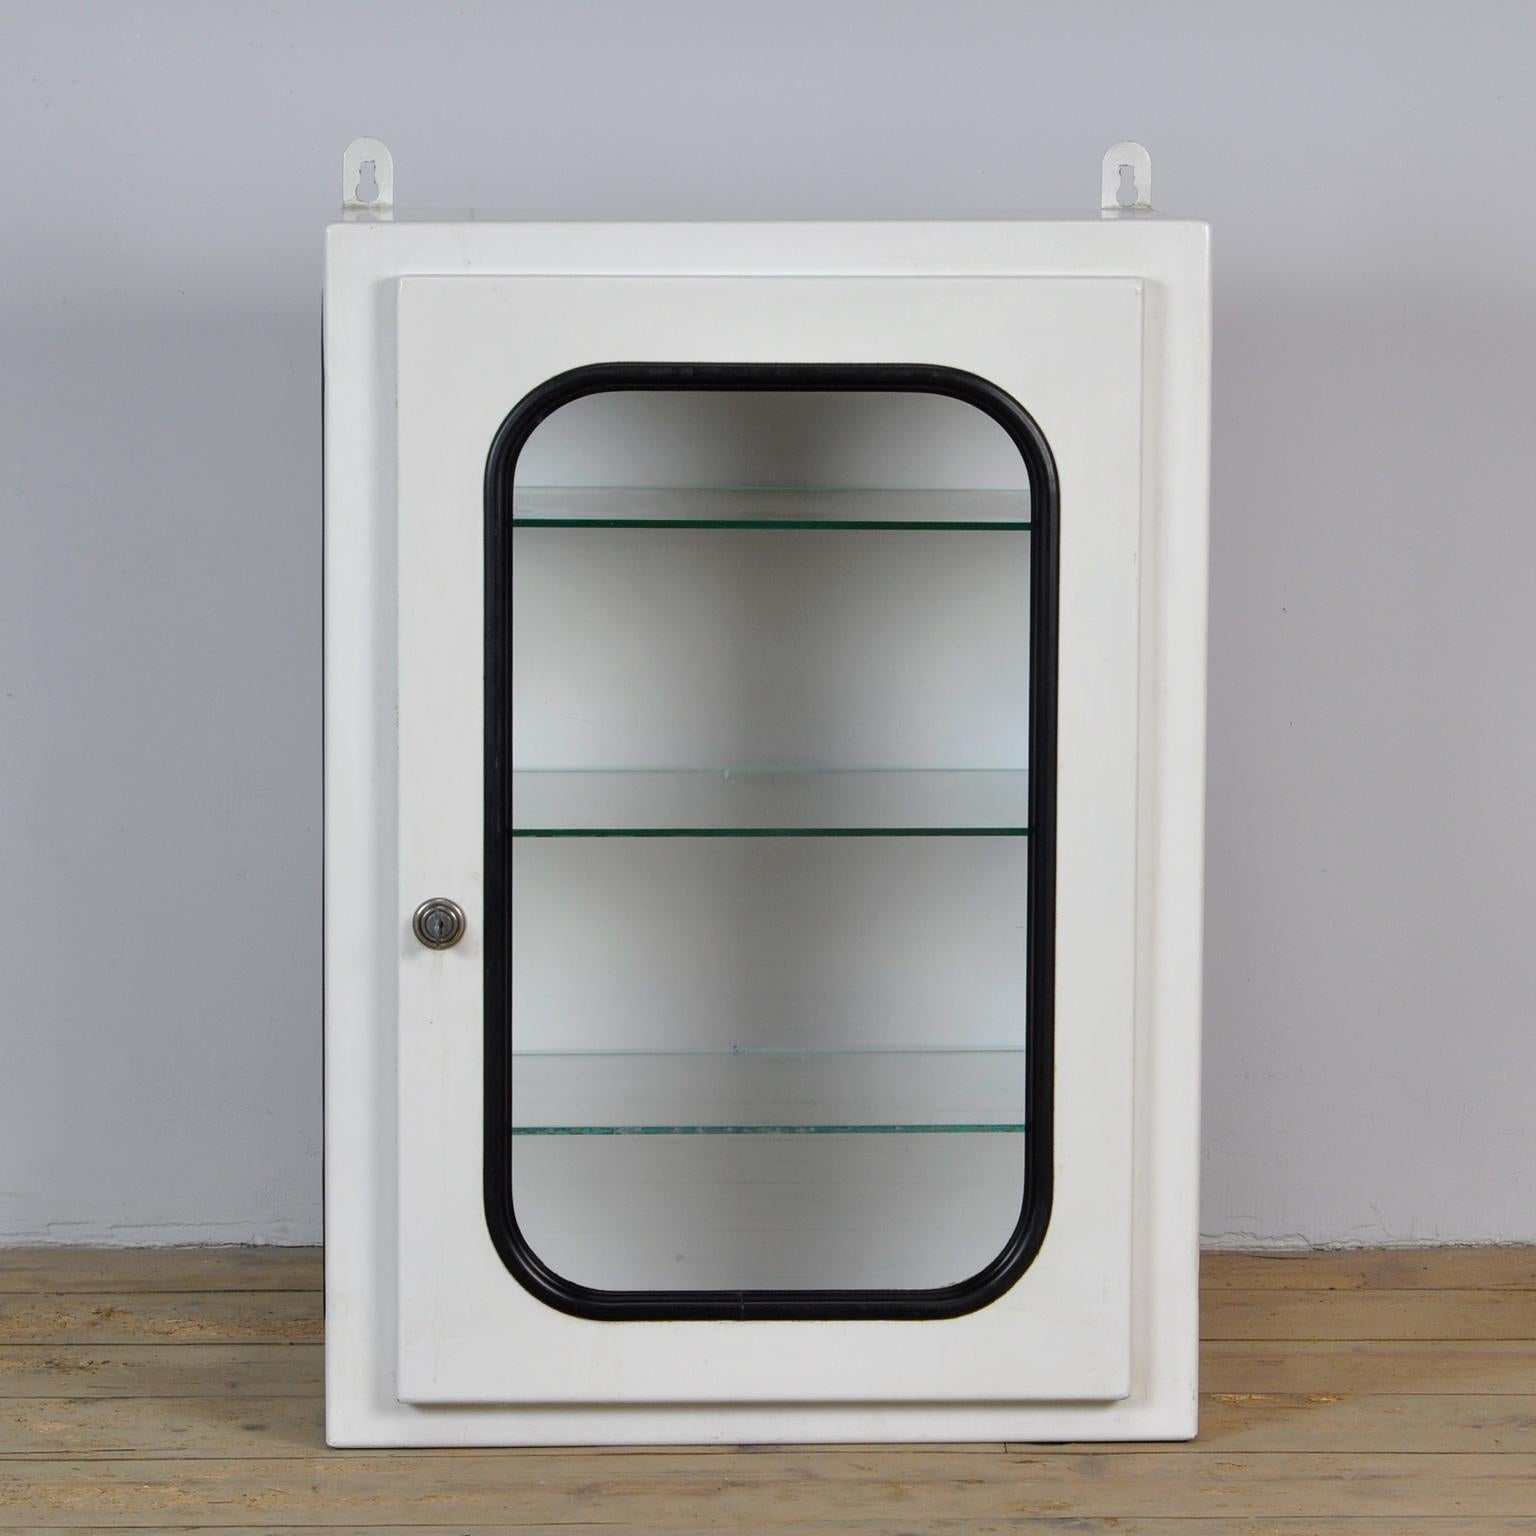 This medical cabinet was designed in the 1970s and produced circa 1975 in hungary. It was used in a hospital in Budapest. It is made of iron and glass. The glass is held by a black rubber strip. The cabinet comes with three adjustable glass shelves.